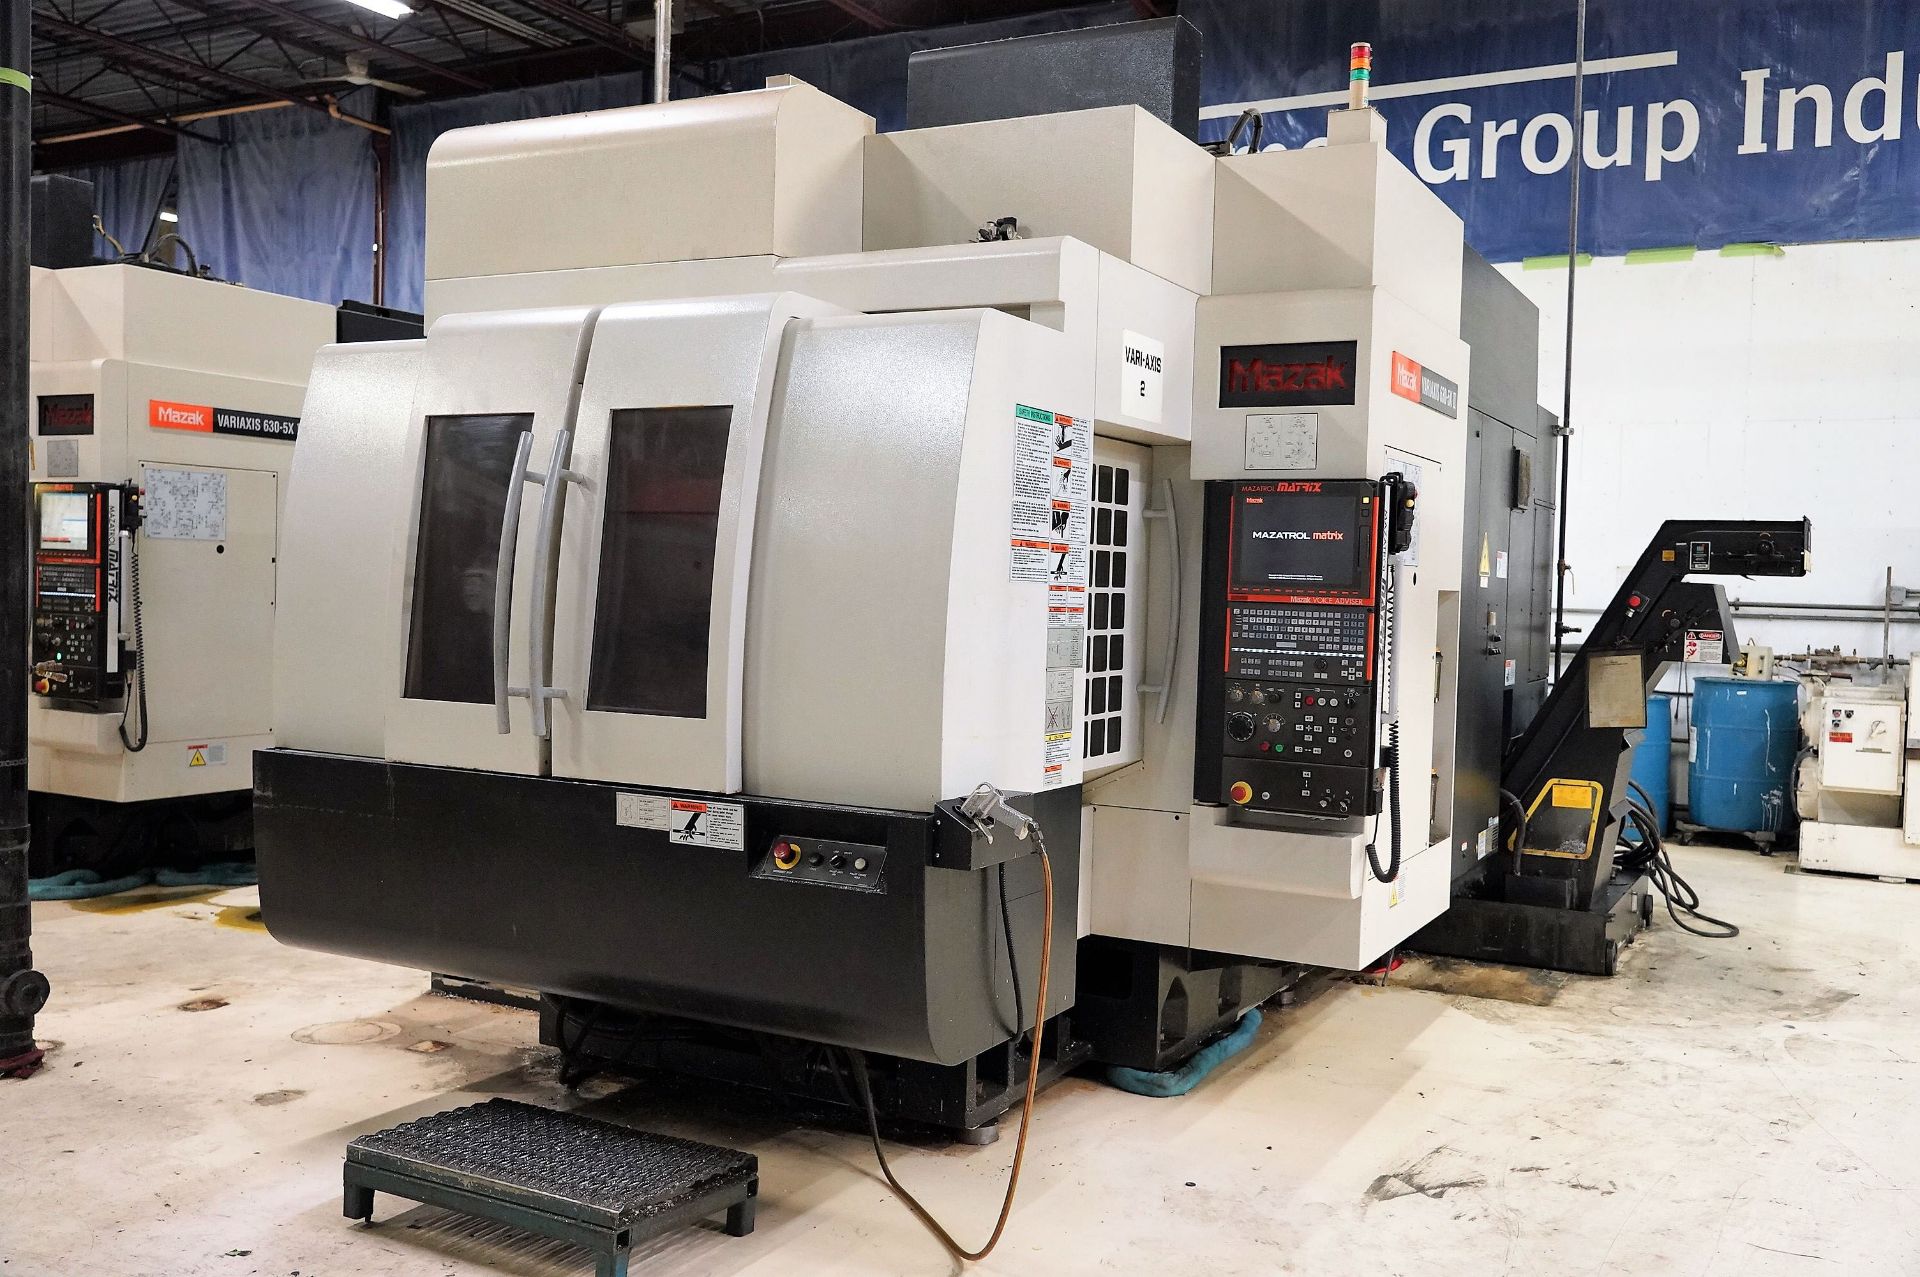 2008 Mazak Variax 630-5X-II 5-Axis CNC Vertical Machining Center With Trunnion Table, Pallet Changer